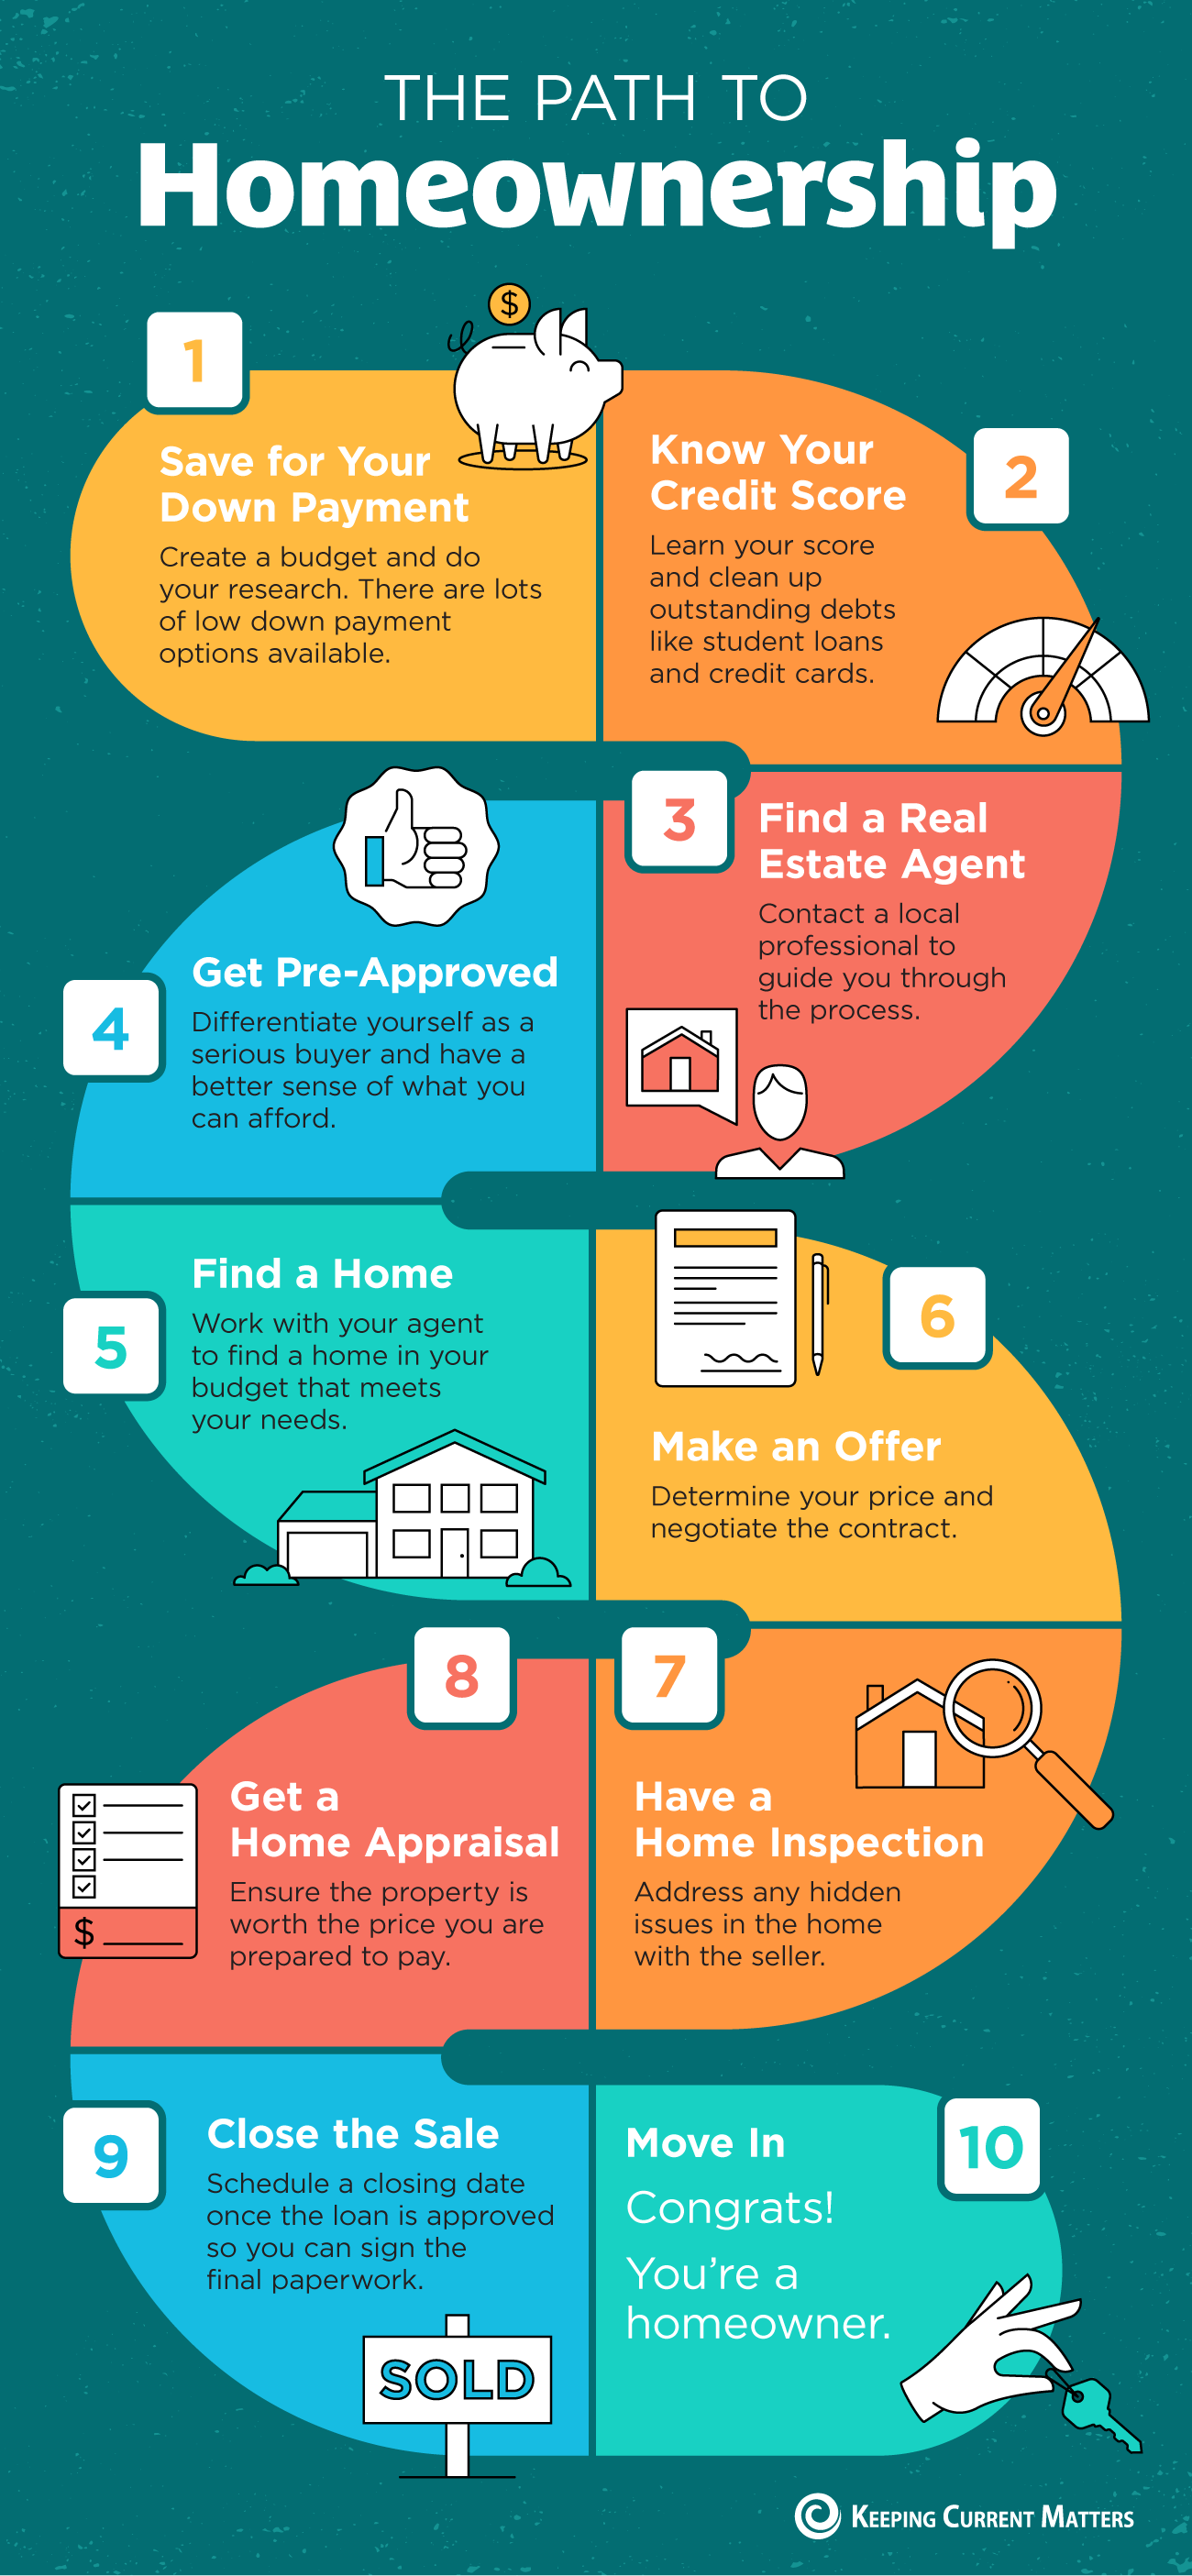 The Path to Homeownership [INFOGRAPHIC] | Keeping Current Matters